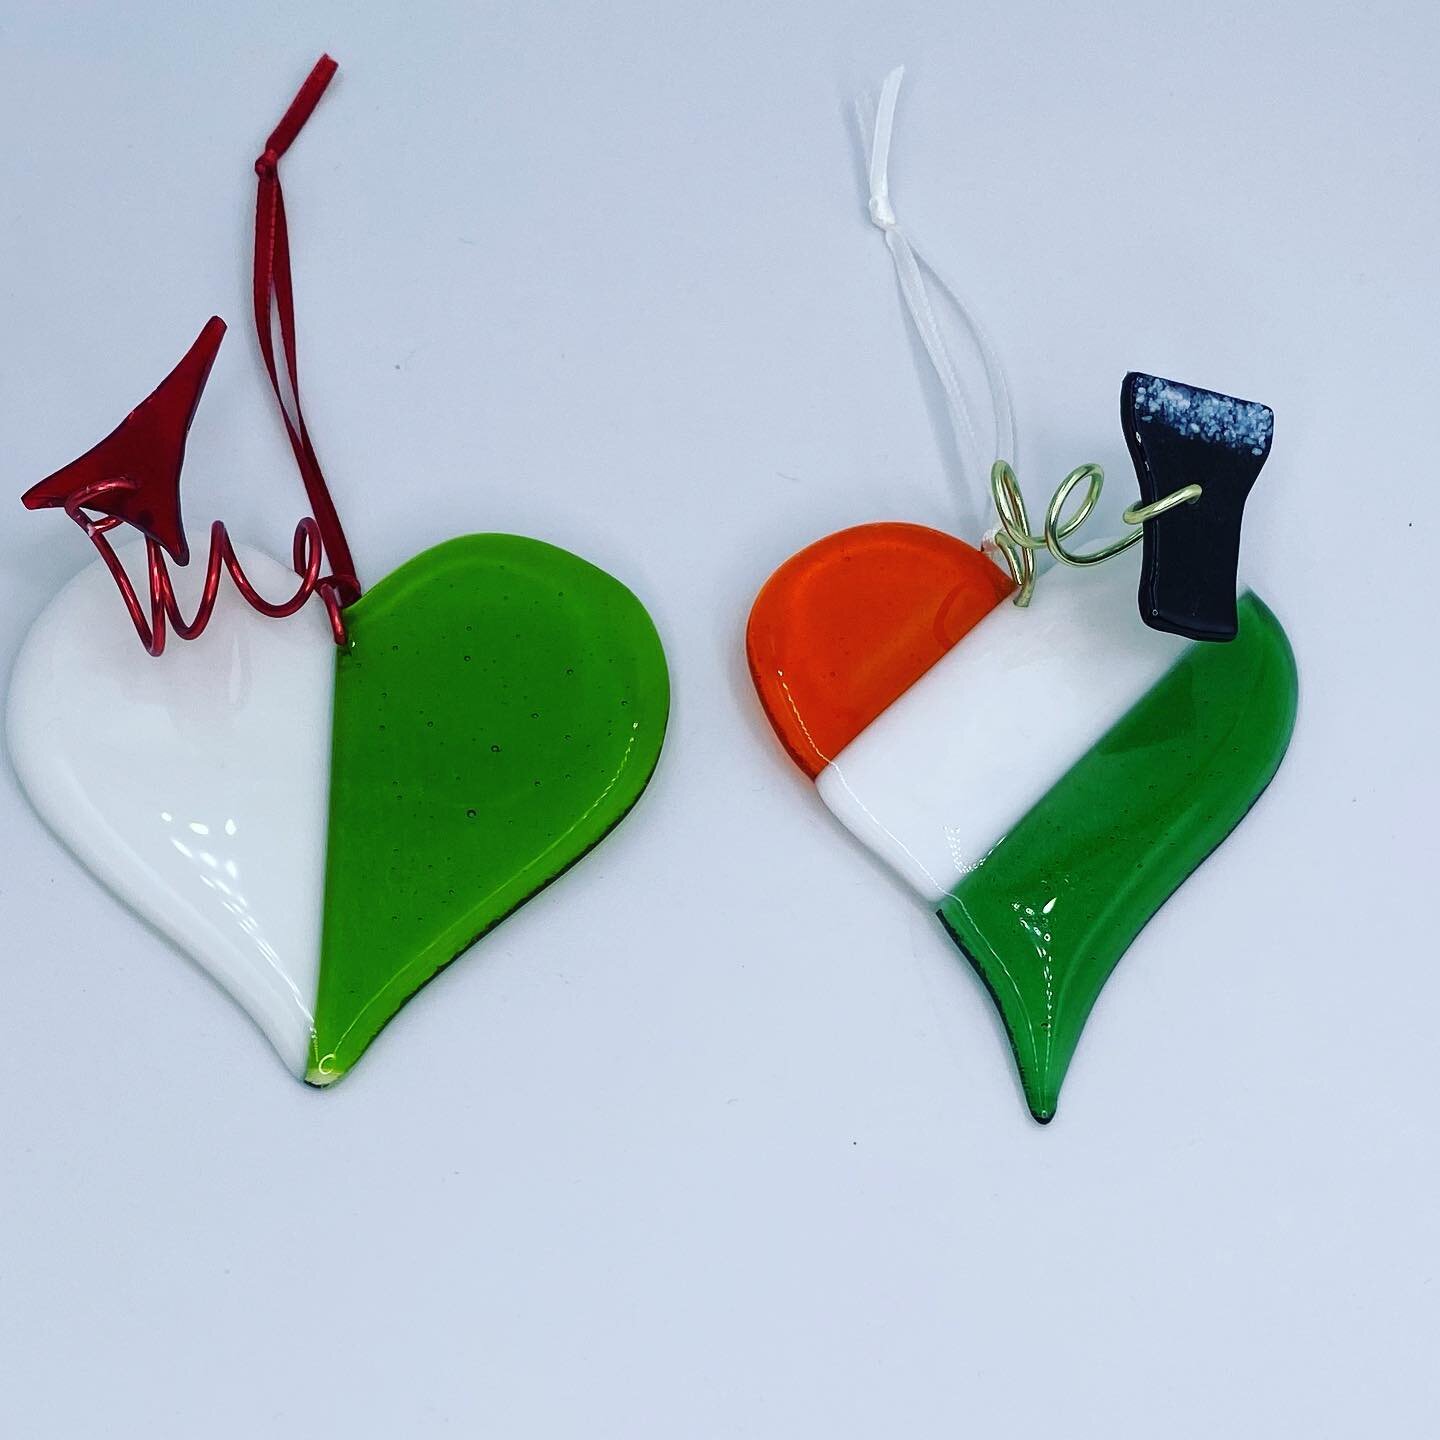 Wales or Ireland? #sixnations #welshrugby #irishrugby #guiness #welshdragon @glass_by_design